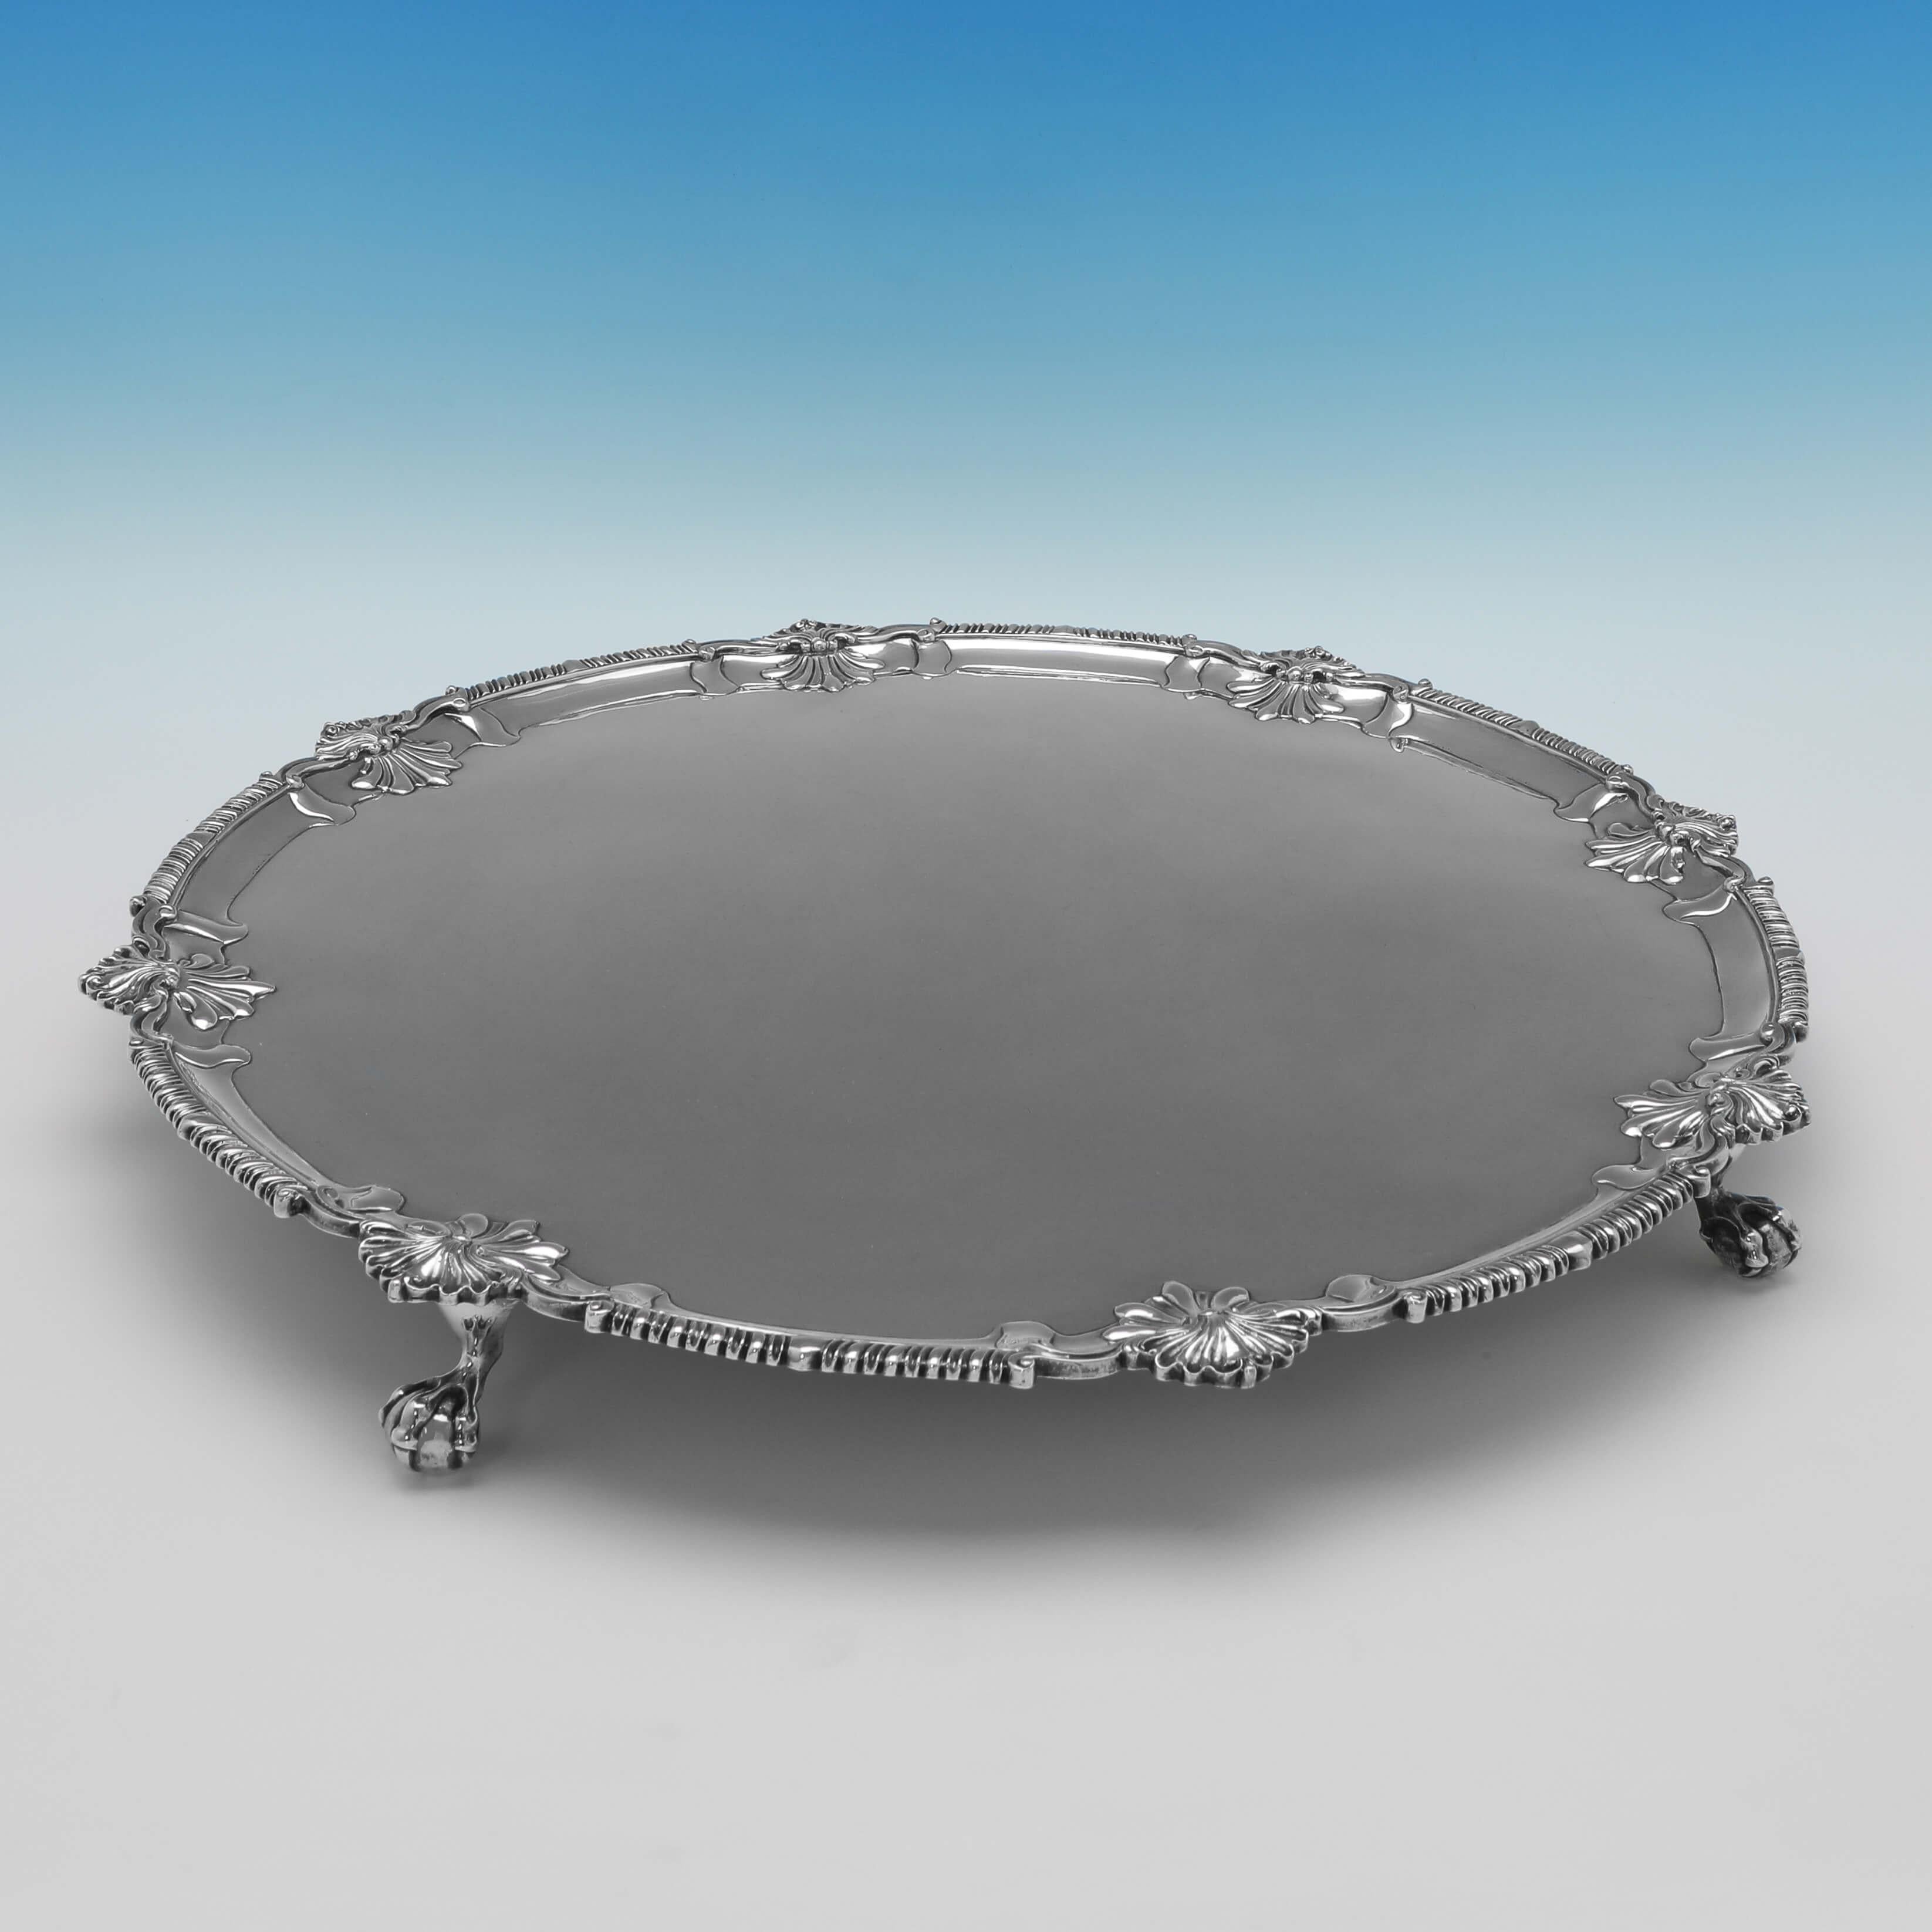 Hallmarked in London in 1772 by Richard Rugg, this wonderful, George III period, antique sterling silver salver, features a shaped shell and gadroon borders and stands on 4 lion paw feet. The salver measures 2